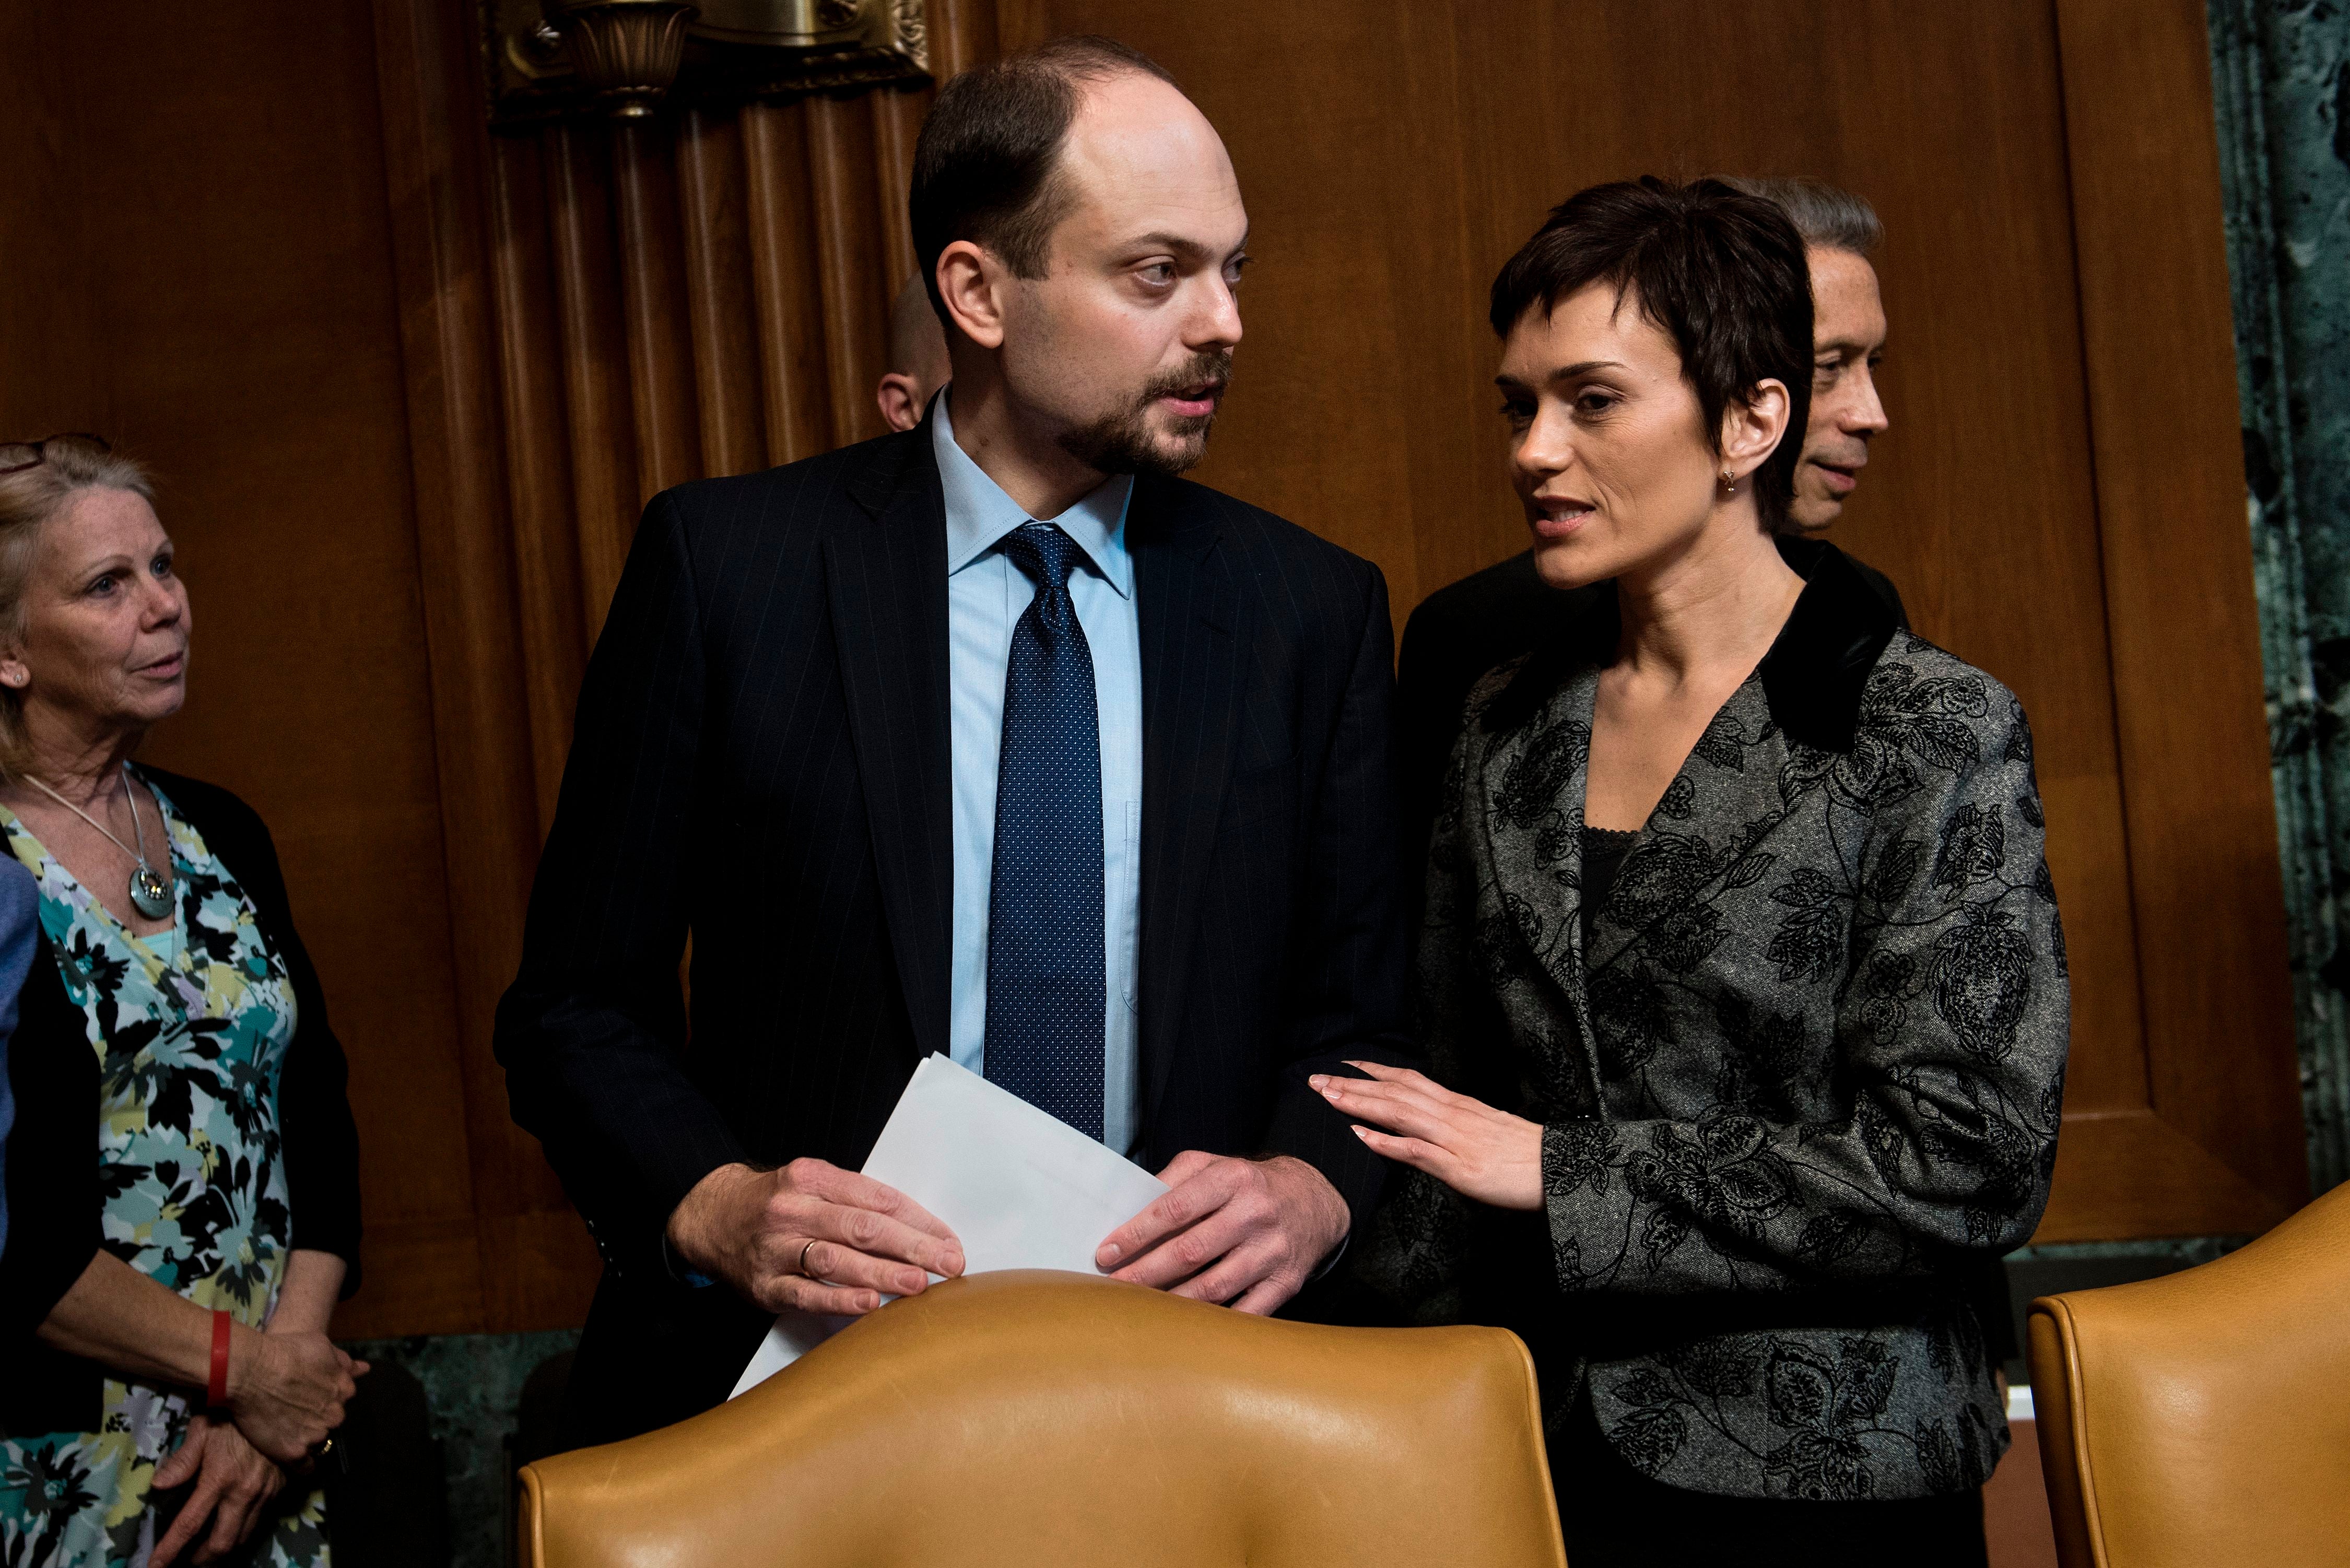 Russian activist Vladimir Kara-Murza (C) arrives with his wife Yevgenia for a hearing of the US Senate Appropriations Subcommittee on State, Foreign Operations and Related Programs on Capitol Hill March 29, 2017